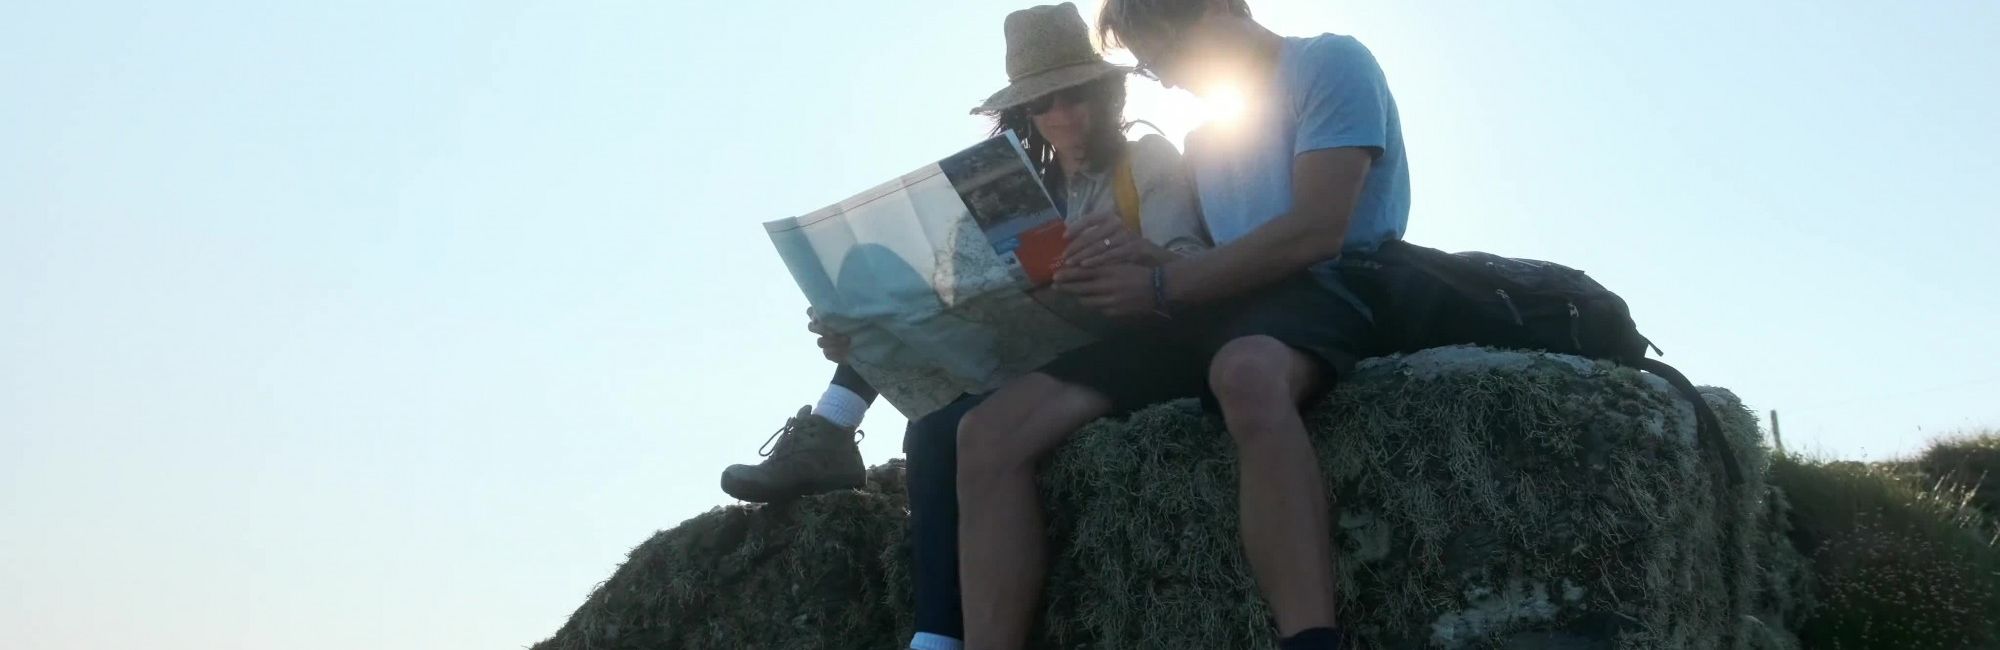 Couple map reading